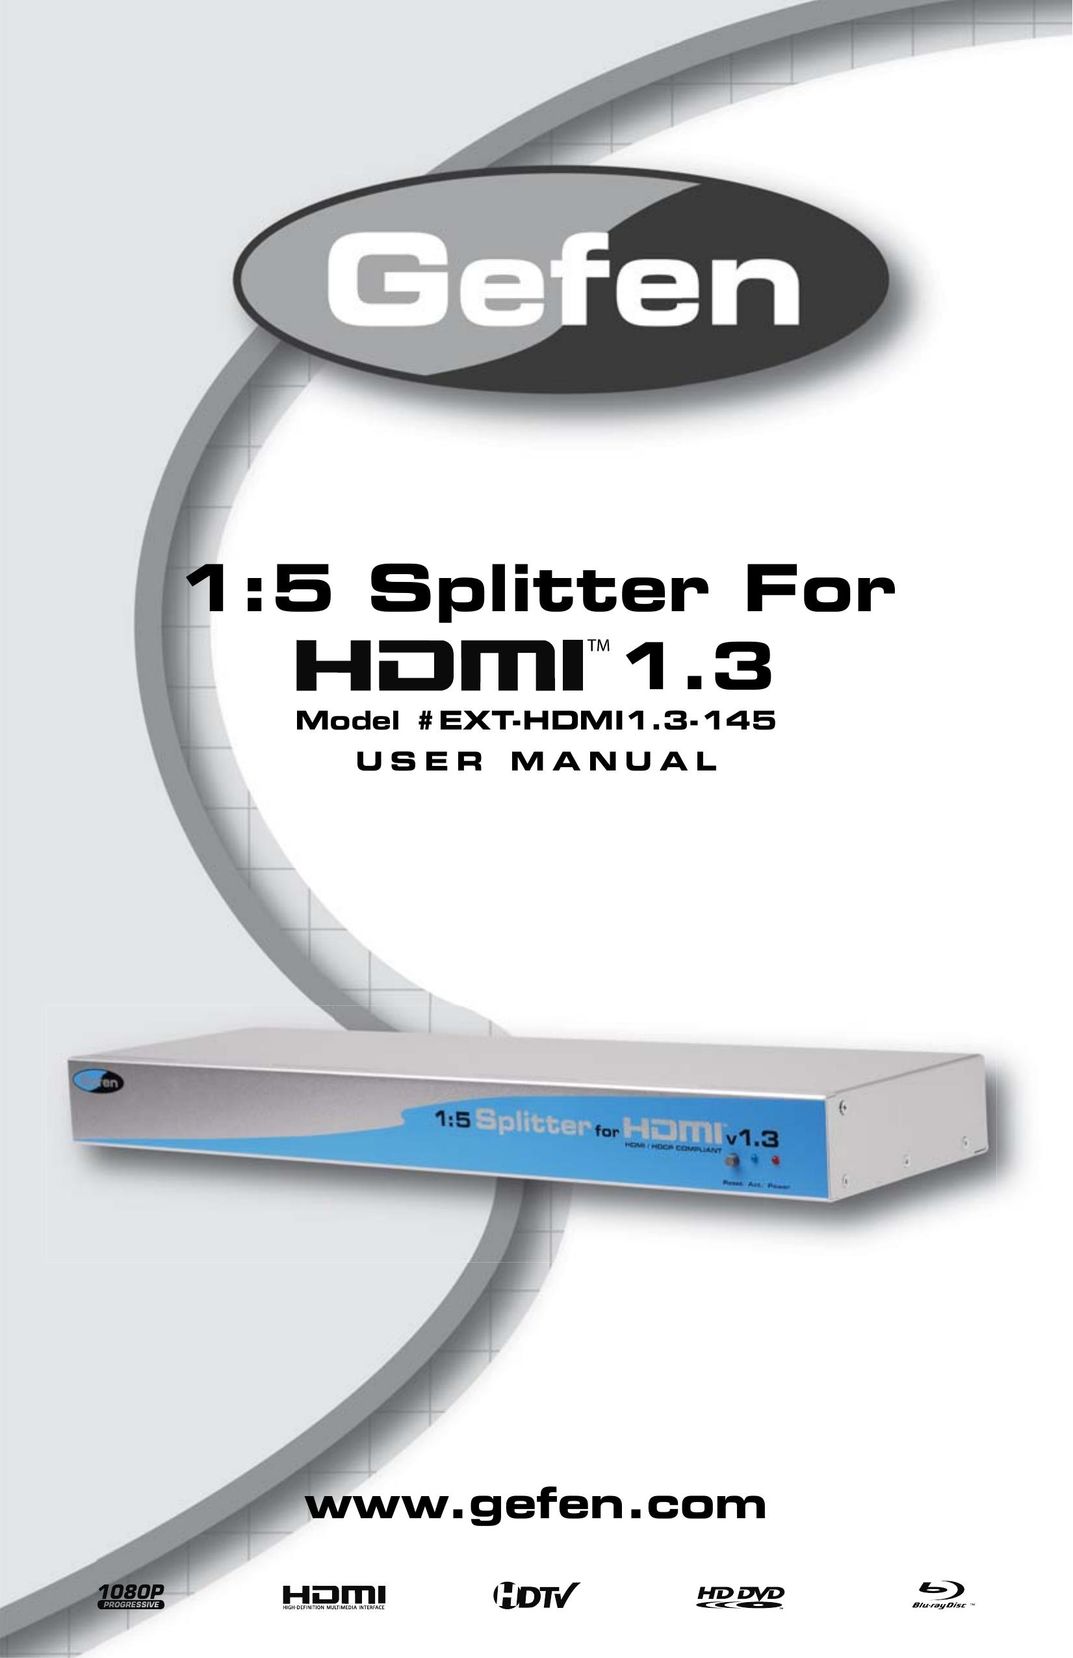 Gefen EXT-HDMI1.3-145 Network Router User Manual